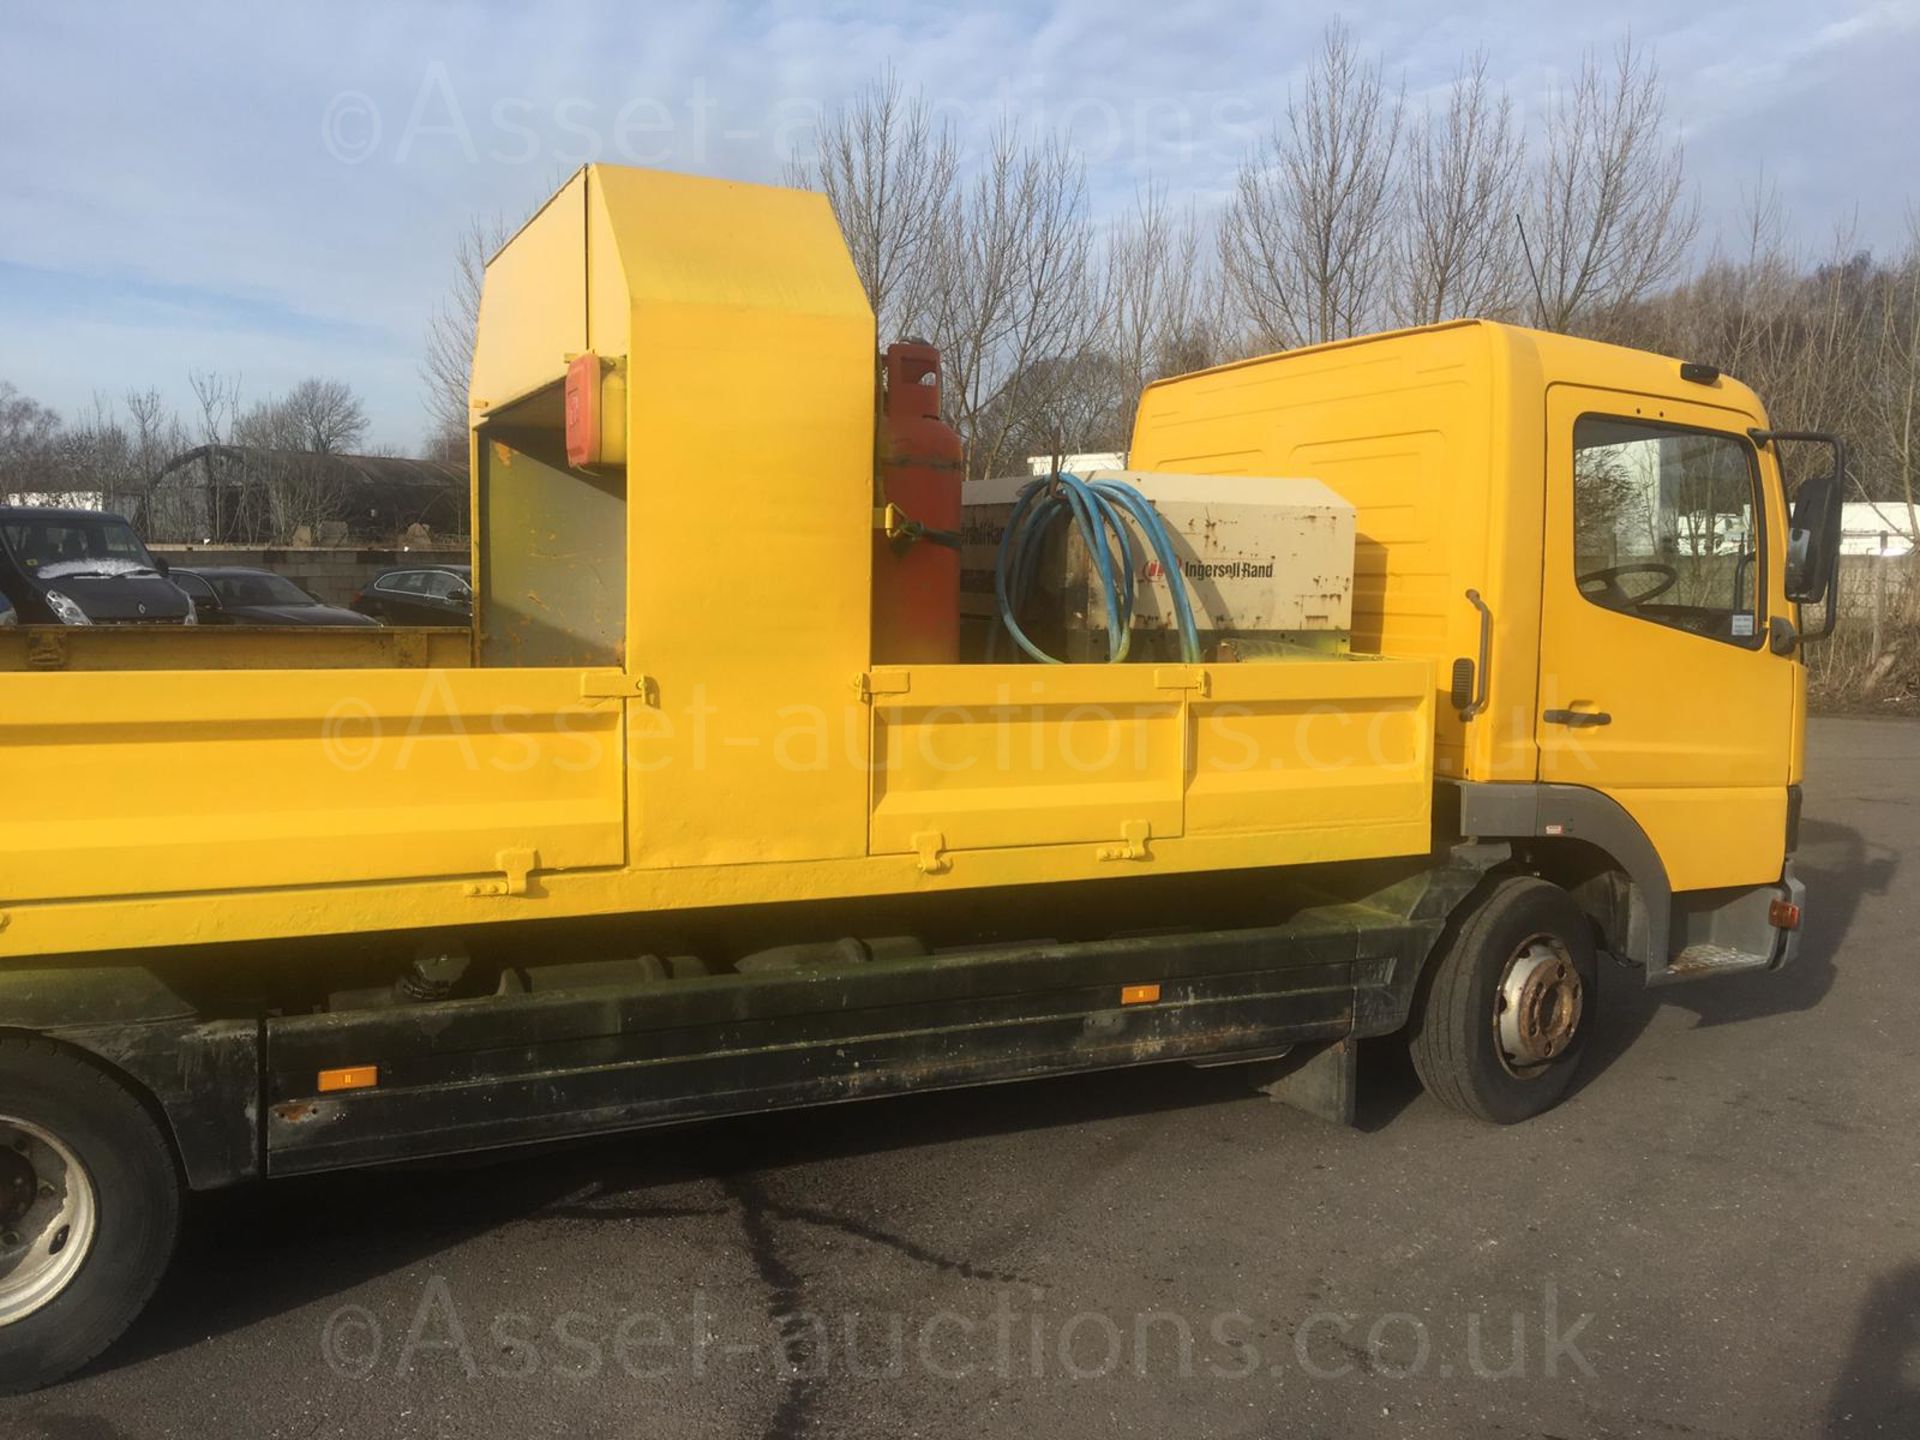 2004/54 REG MERCEDES ATEGO 1018 DAY YELLOW DROPSIDE LINE PAINTING LORRY 4.3L DIESEL ENGINE *NO VAT* - Image 20 of 128